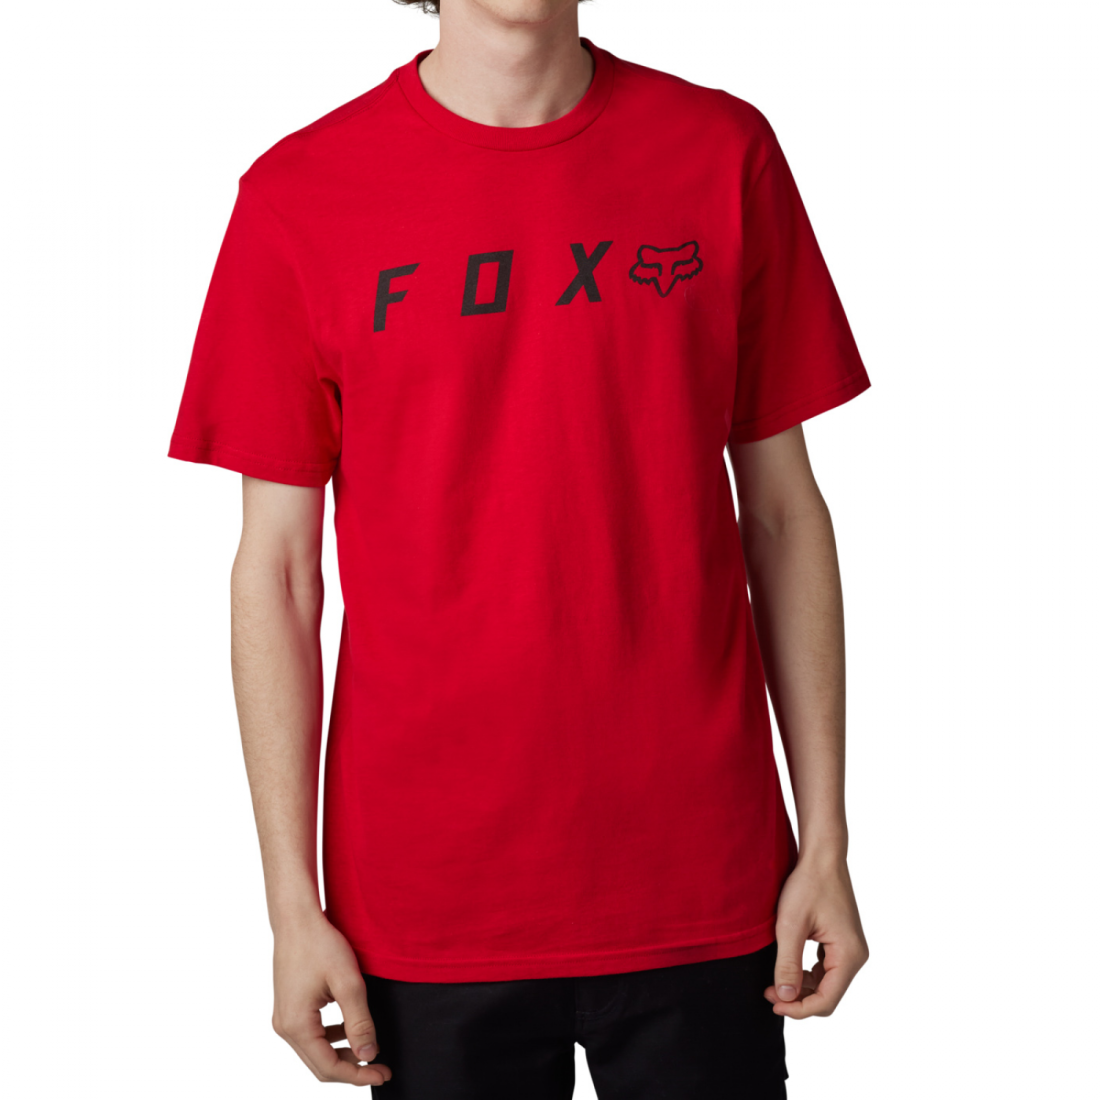 Absolute Ss Prem Tee Flame Red